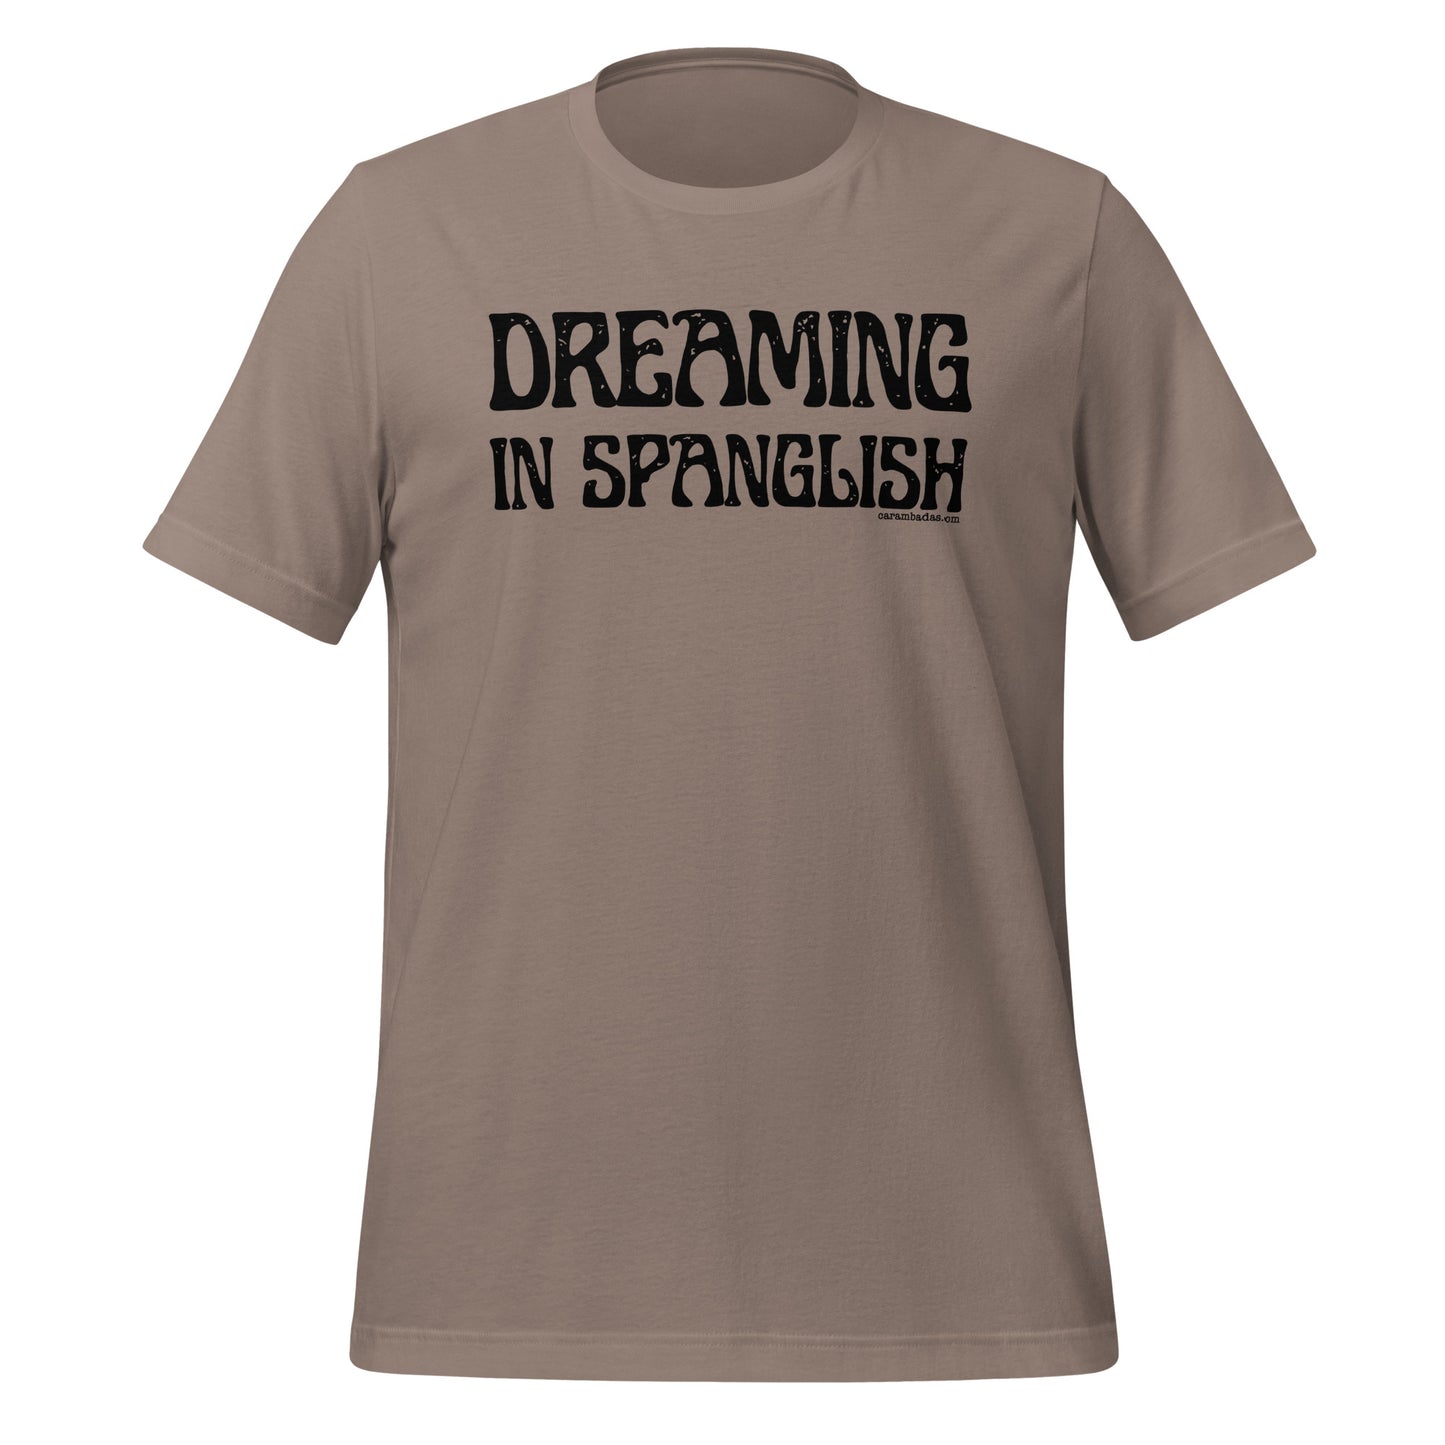 Dreaming in Spanglish Unisex t-shirt